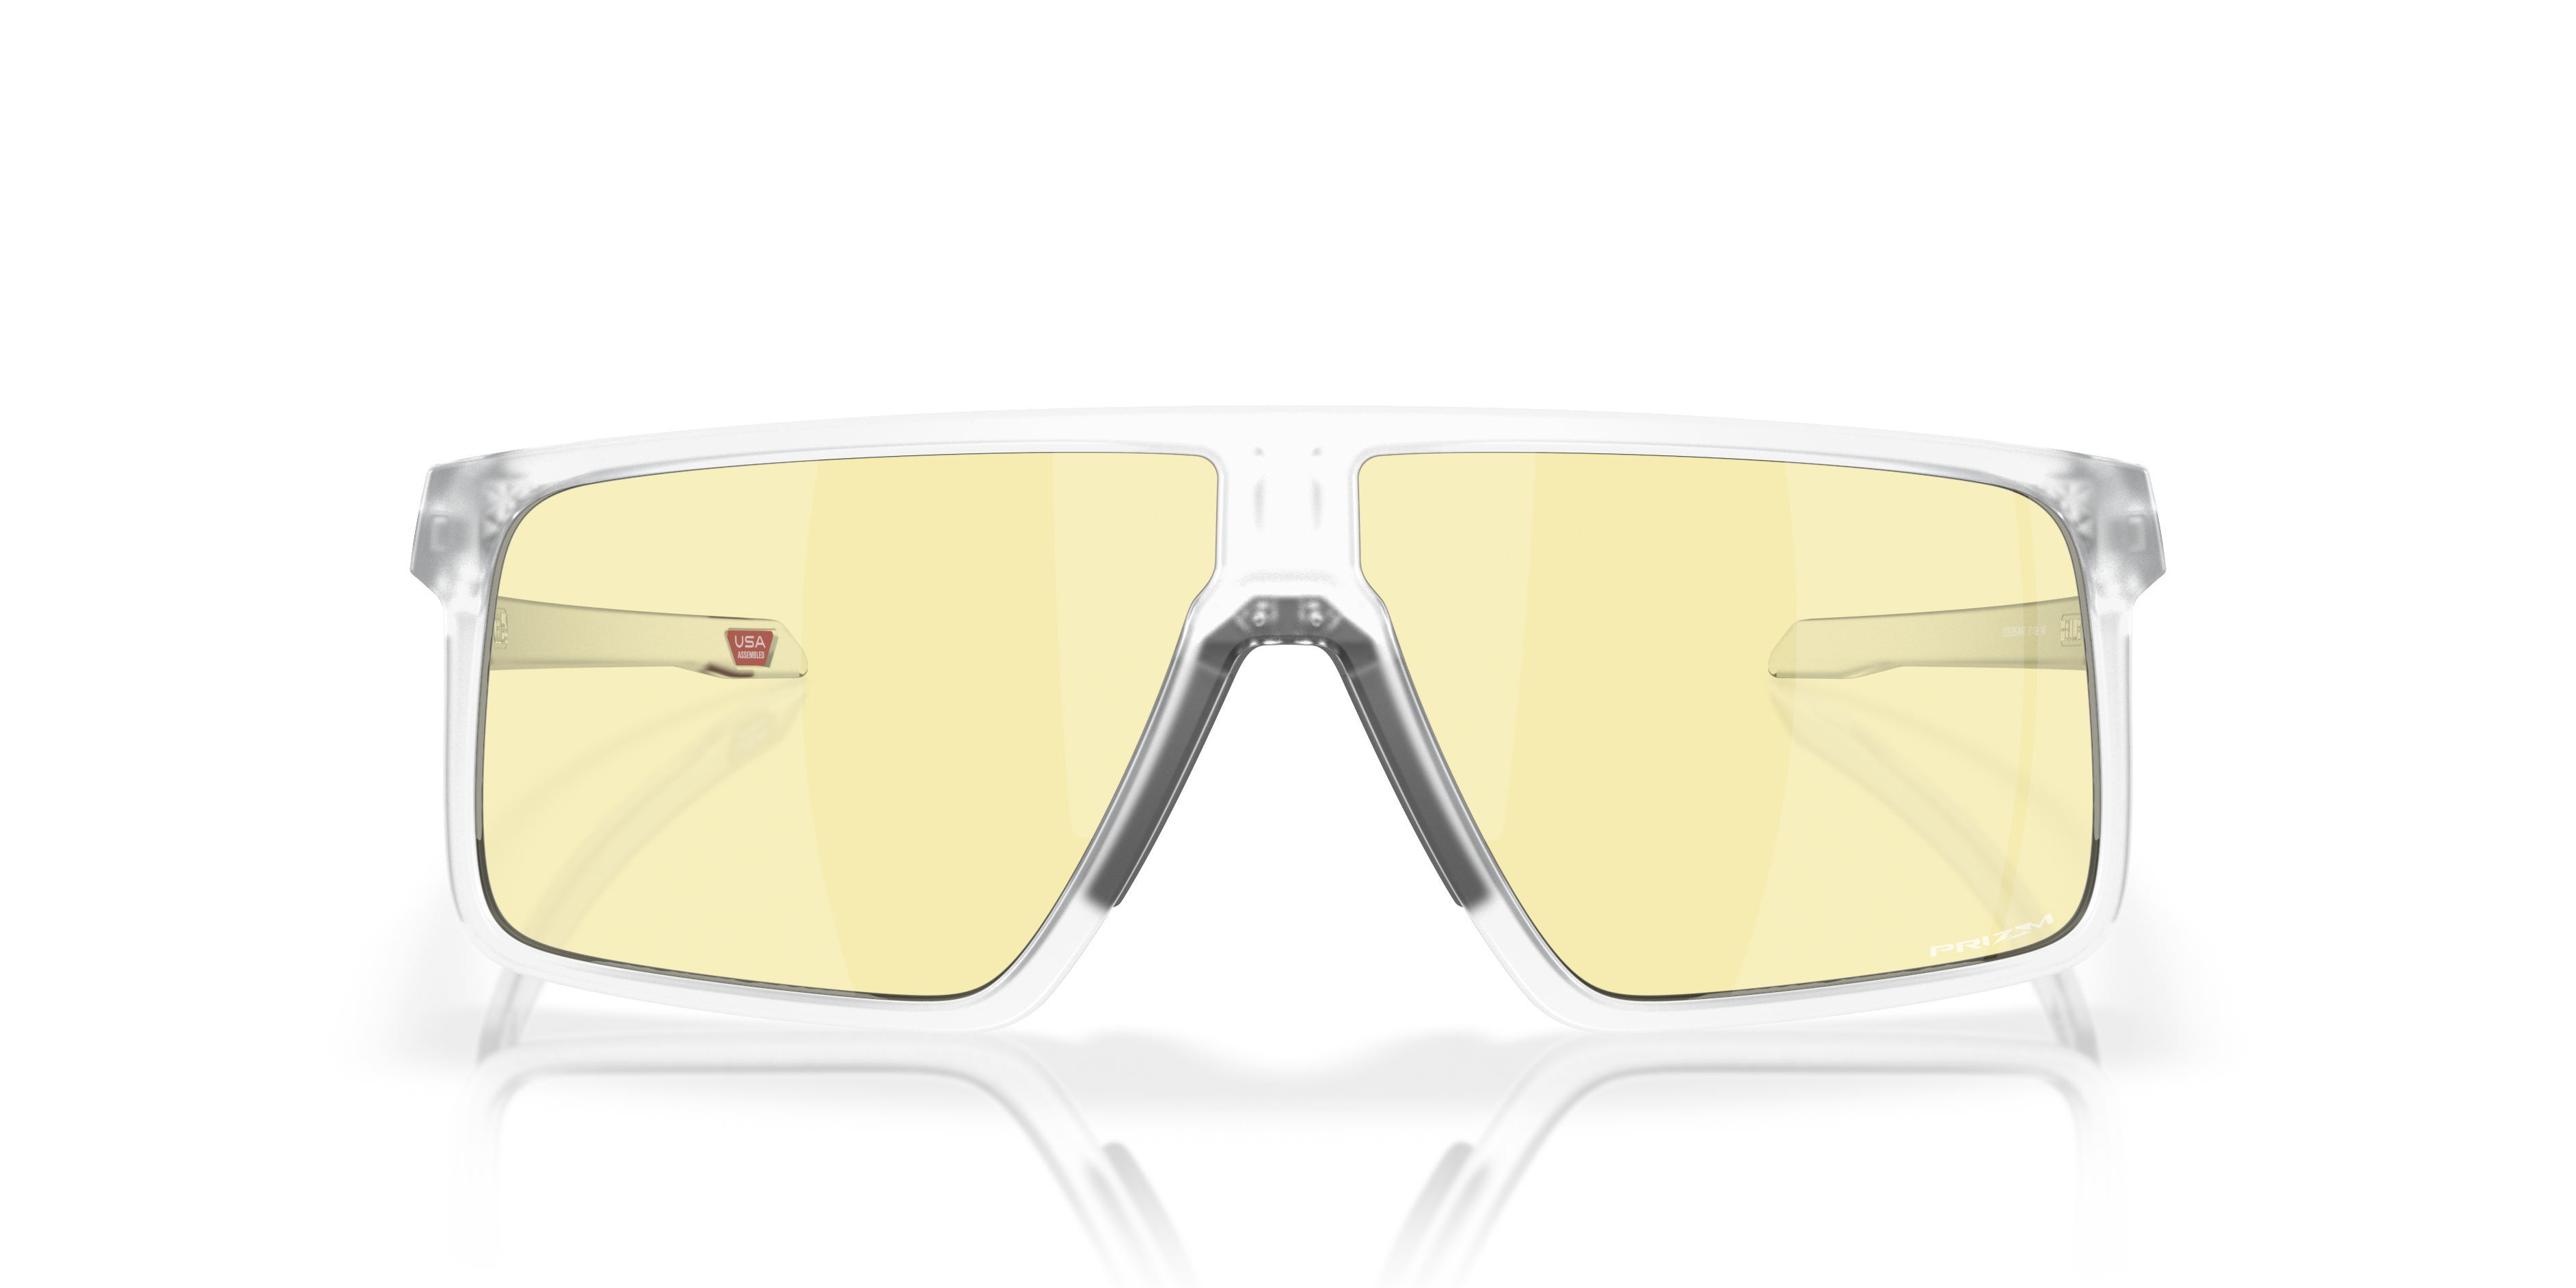 [products.image.front] Oakley Helux OO 9285 Sunglasses